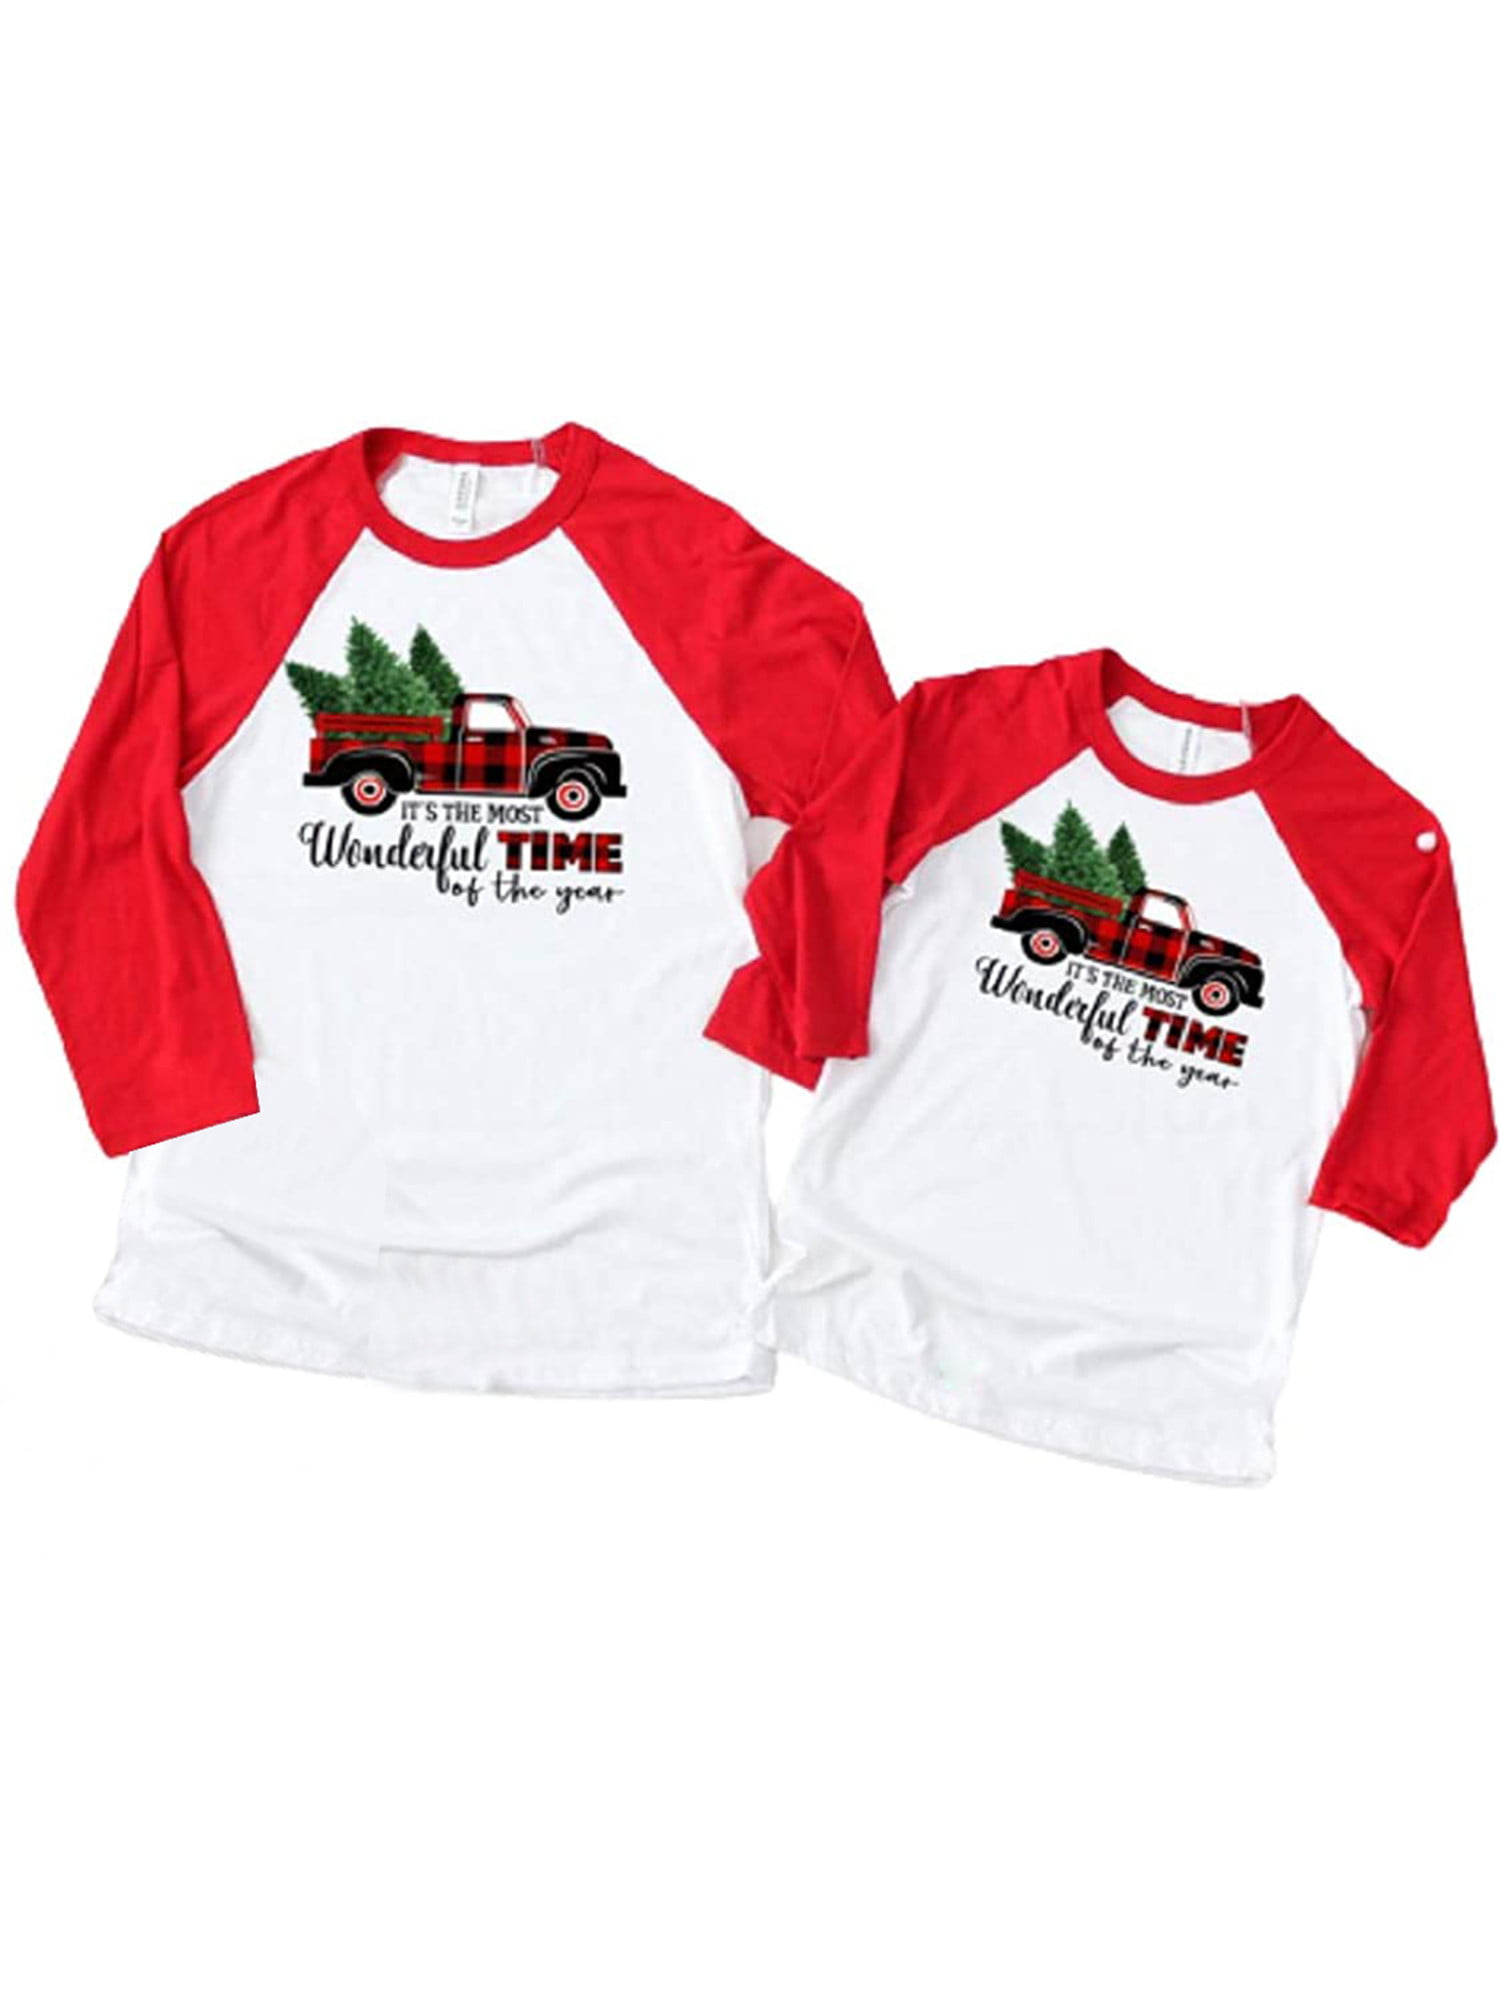 Holiday shirts Matching Mommy and me Christmas shirts mini Christmas shirts Mommy and Me Shirts mama Merry shirts,Xmas matching outfit